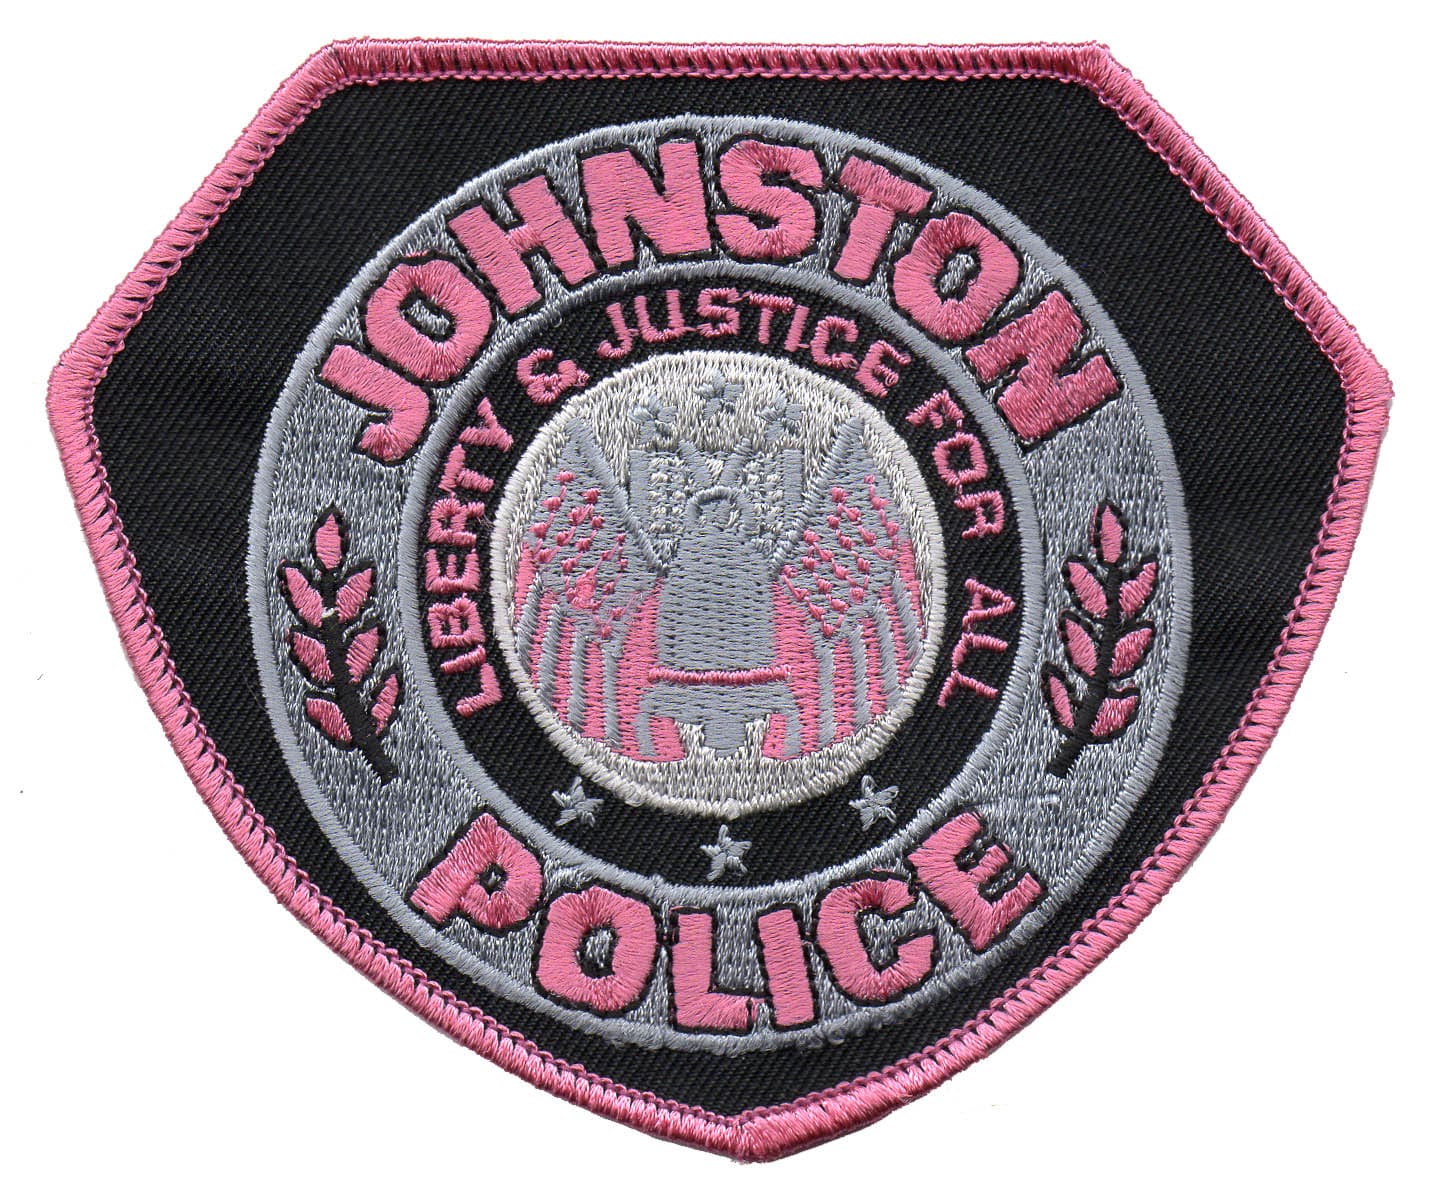 Johnston Police Department Pink Patch